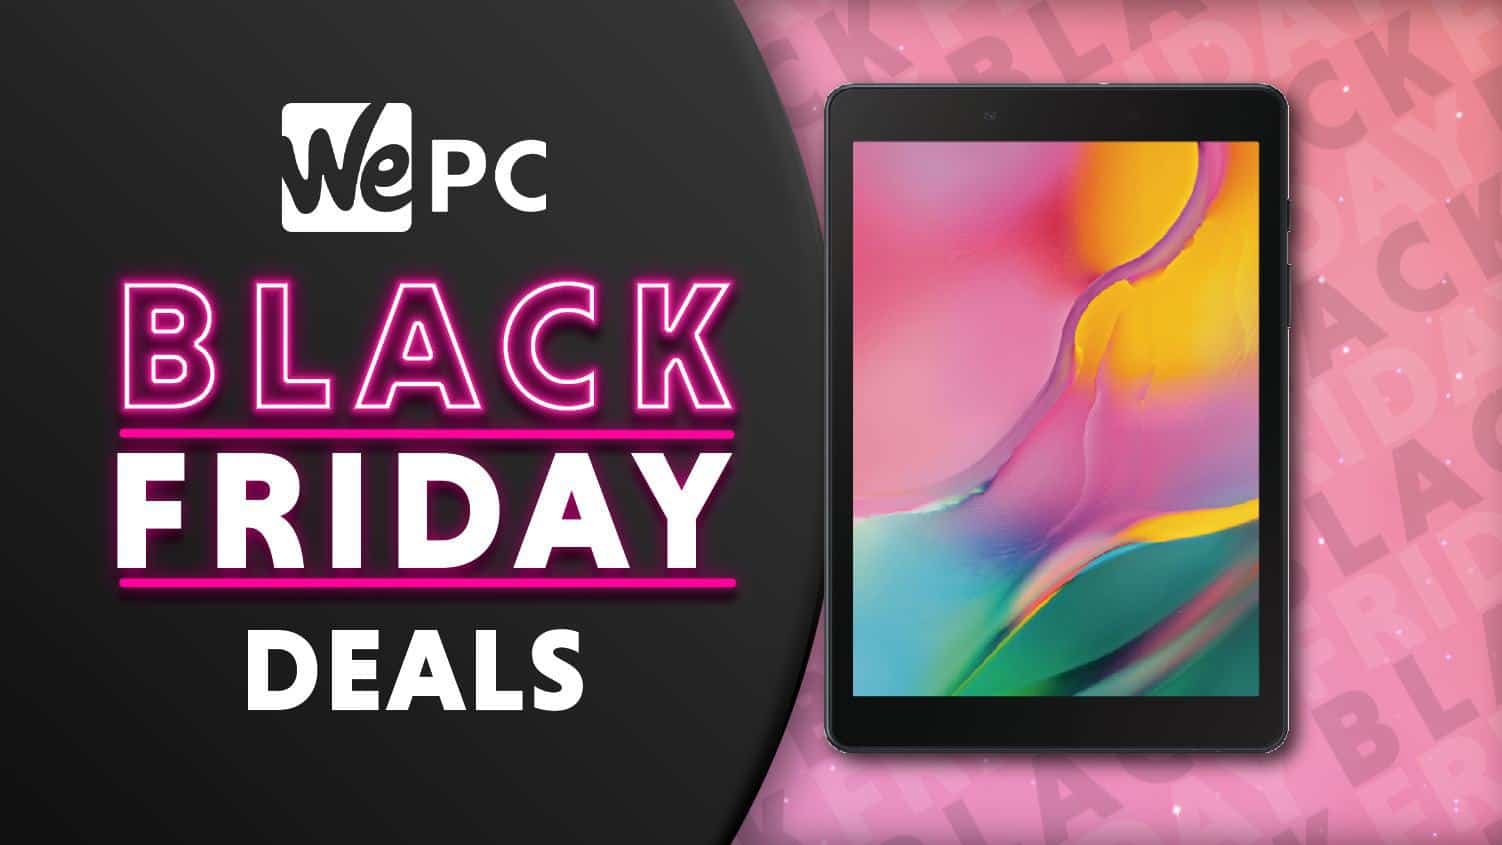 Save $50 on the Samsung Galaxy Tab A – Early Black Friday deals